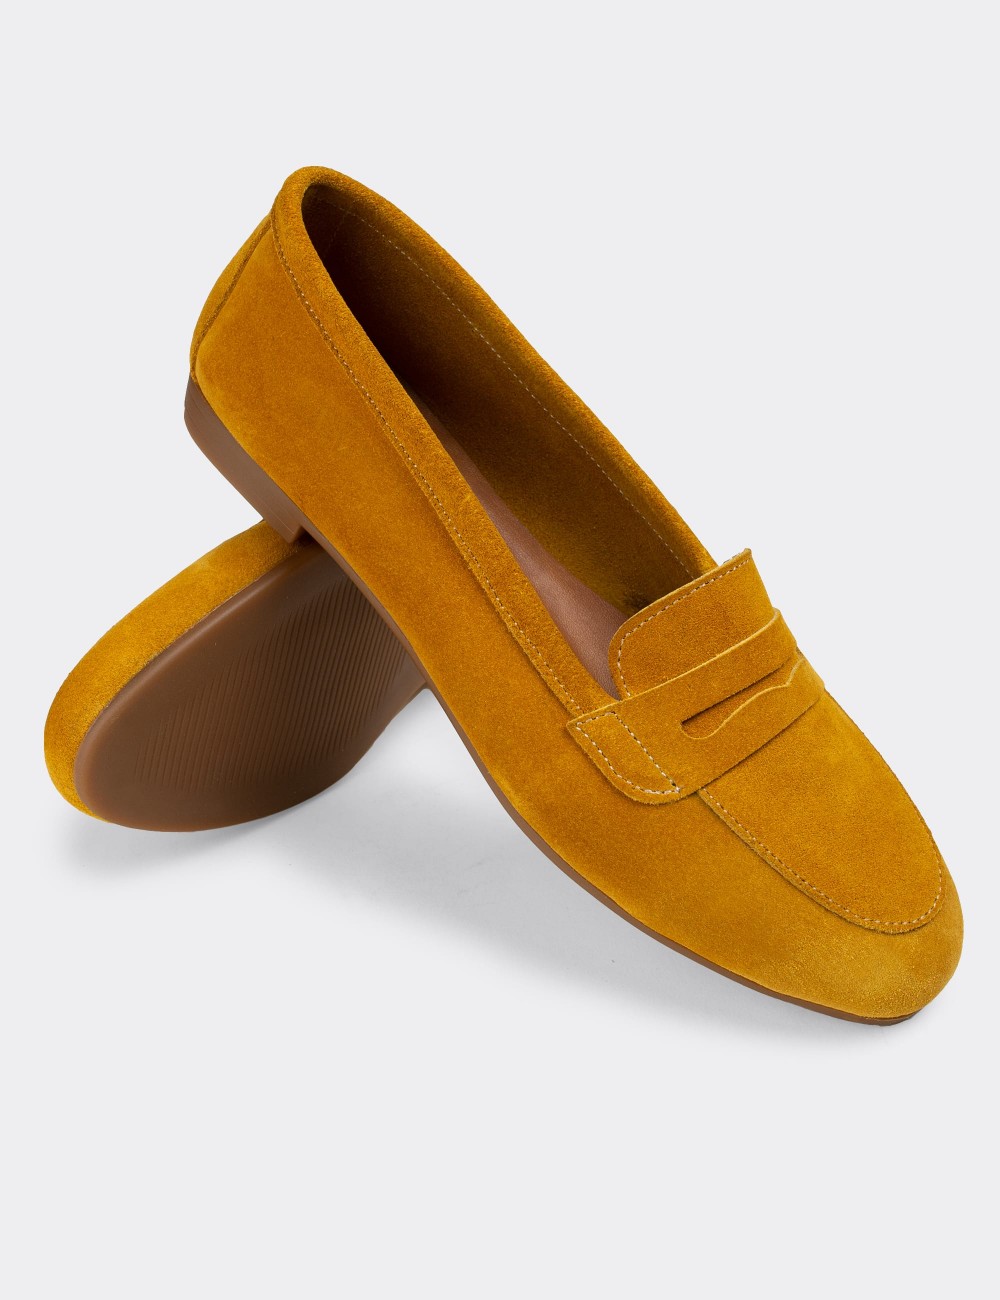 Yellow Suede Leather Loafers - E3202ZSRIC01